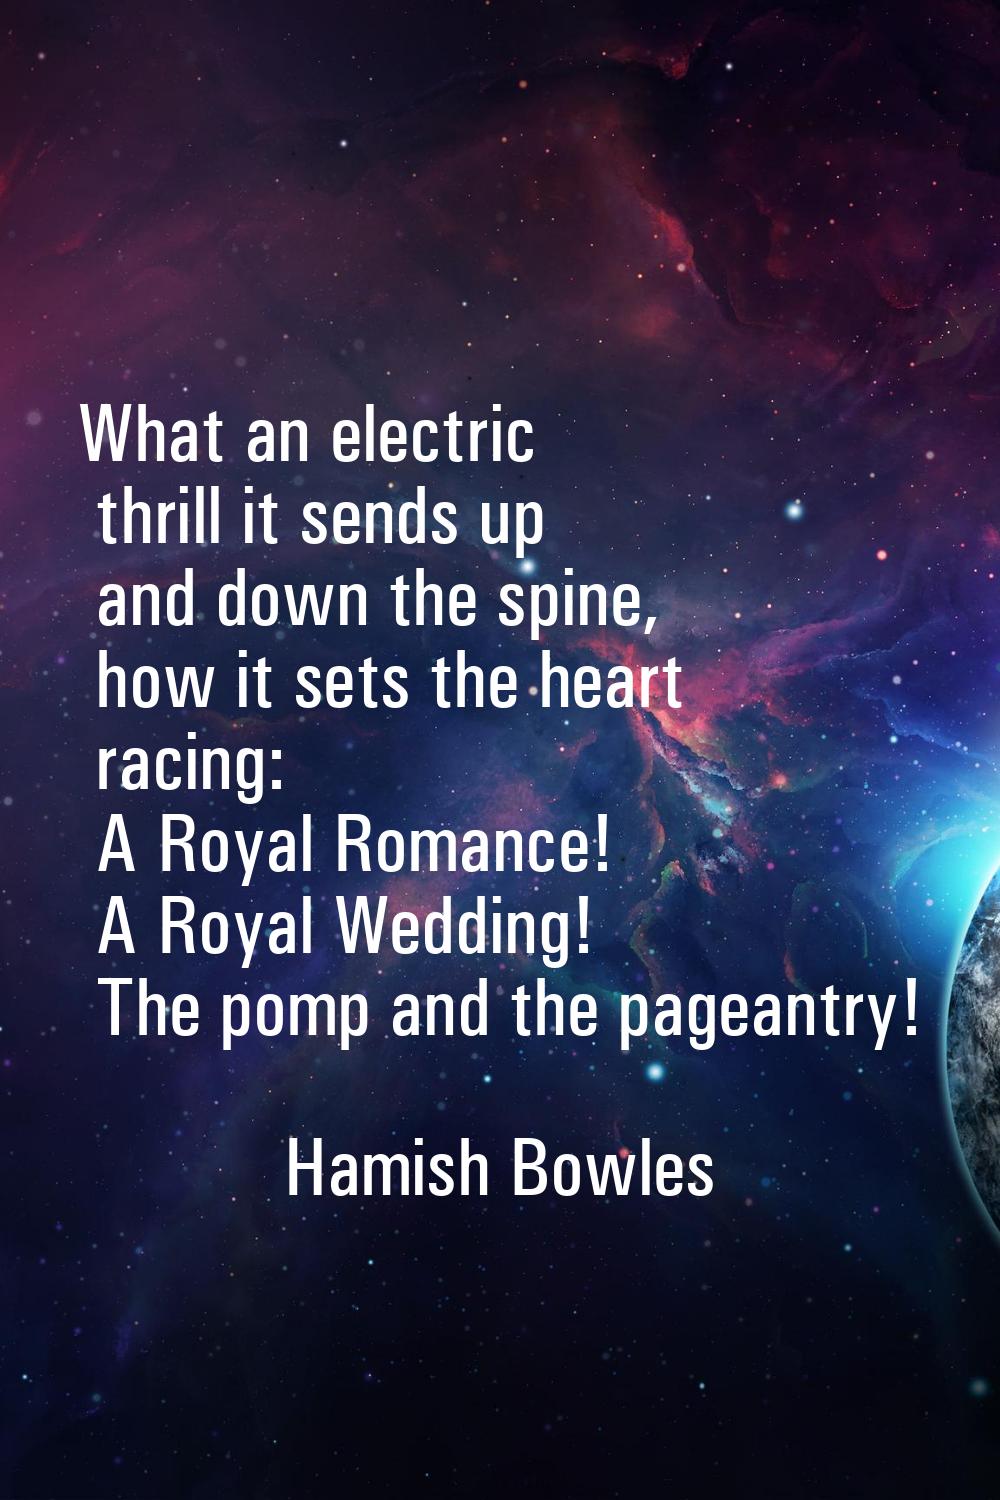 What an electric thrill it sends up and down the spine, how it sets the heart racing: A Royal Roman